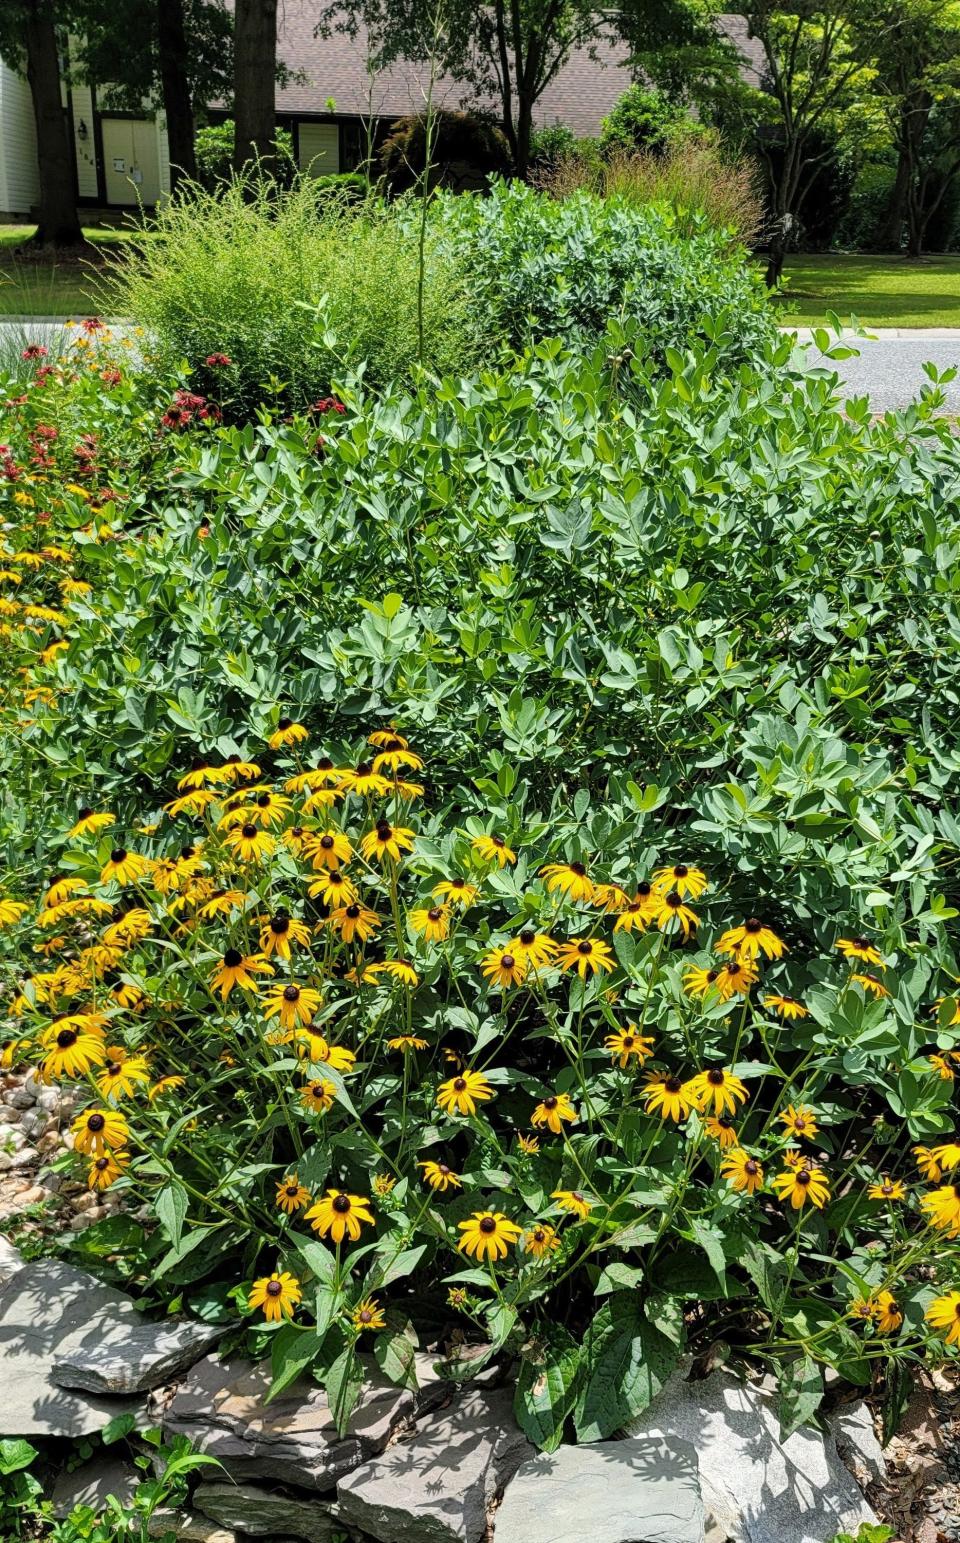 This native plant bed created by Kent County Master Gardener program member Kathy Doyle in Dover includes, from front to back, brown-eyed Susan, blue false indigo, bee balm, Adam's needle and "fireworks" goldenrod, to attract and feed bees, butterflies and birds.